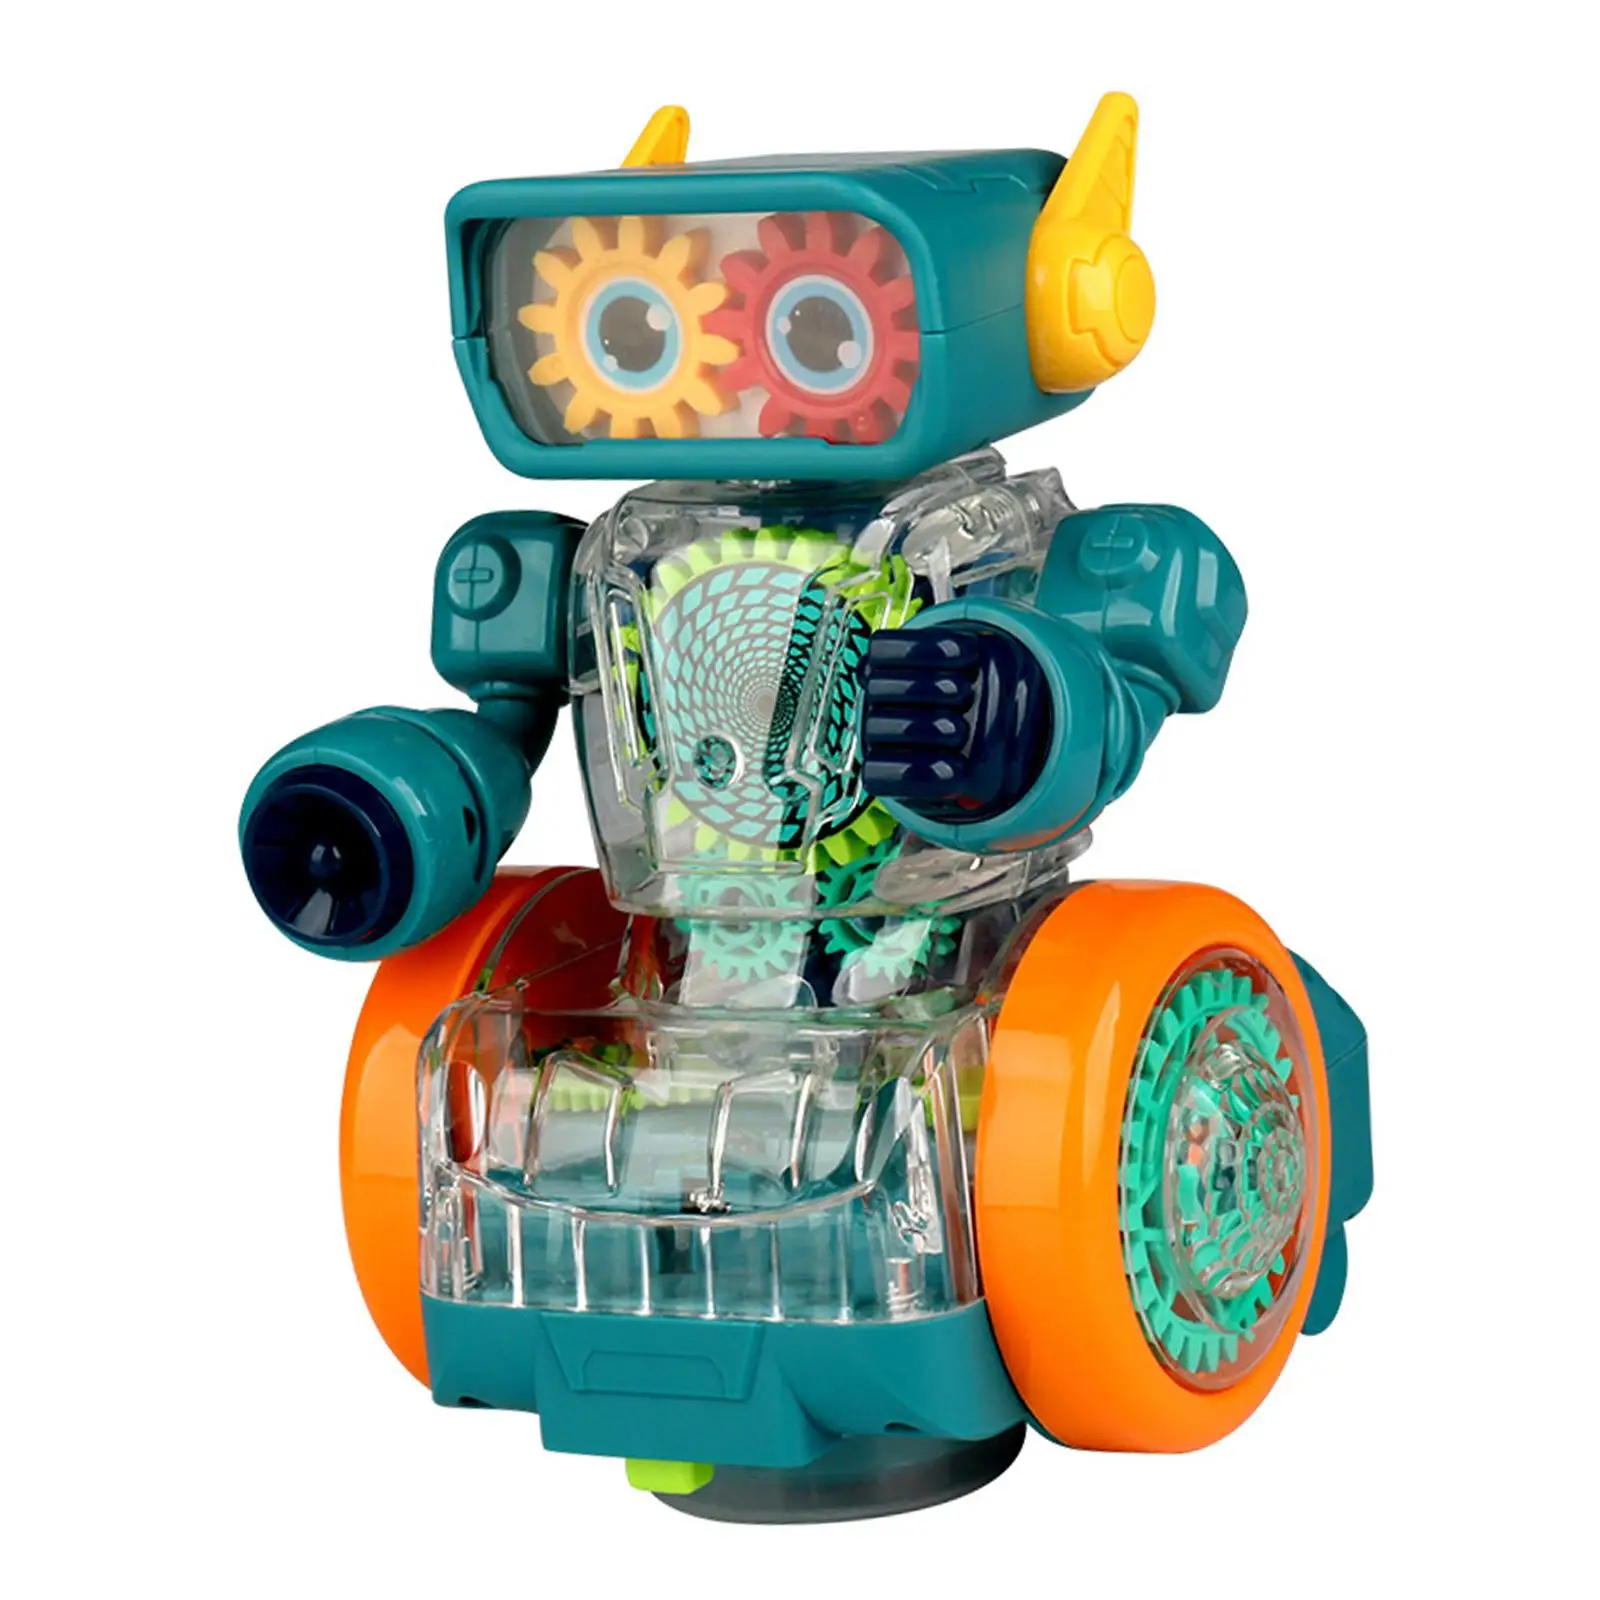 Mechanical Gear Robot Toy with Lights with Visible Moving Gears for Toddlers